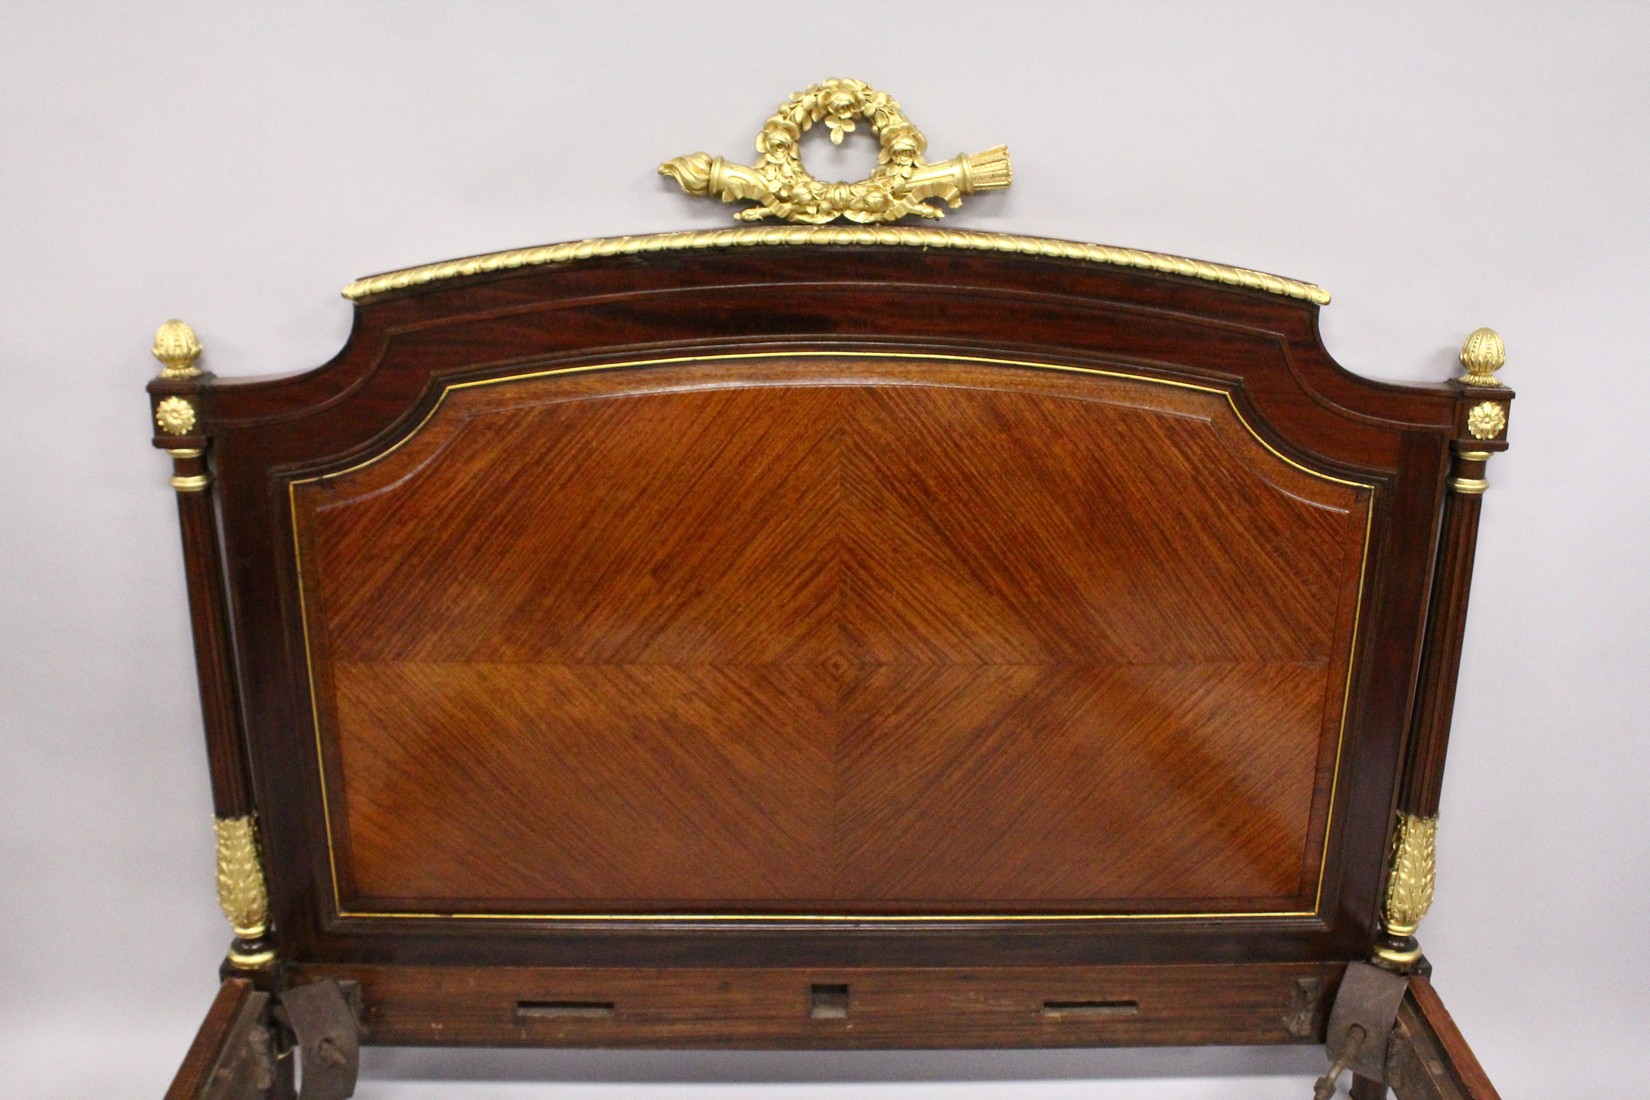 A GOOD LATE 19TH CENTURY FRENCH LOUIS XVI STYLE KINGWOOD MAHOGANY AND ORMOLU BED FRAME, the - Image 5 of 7